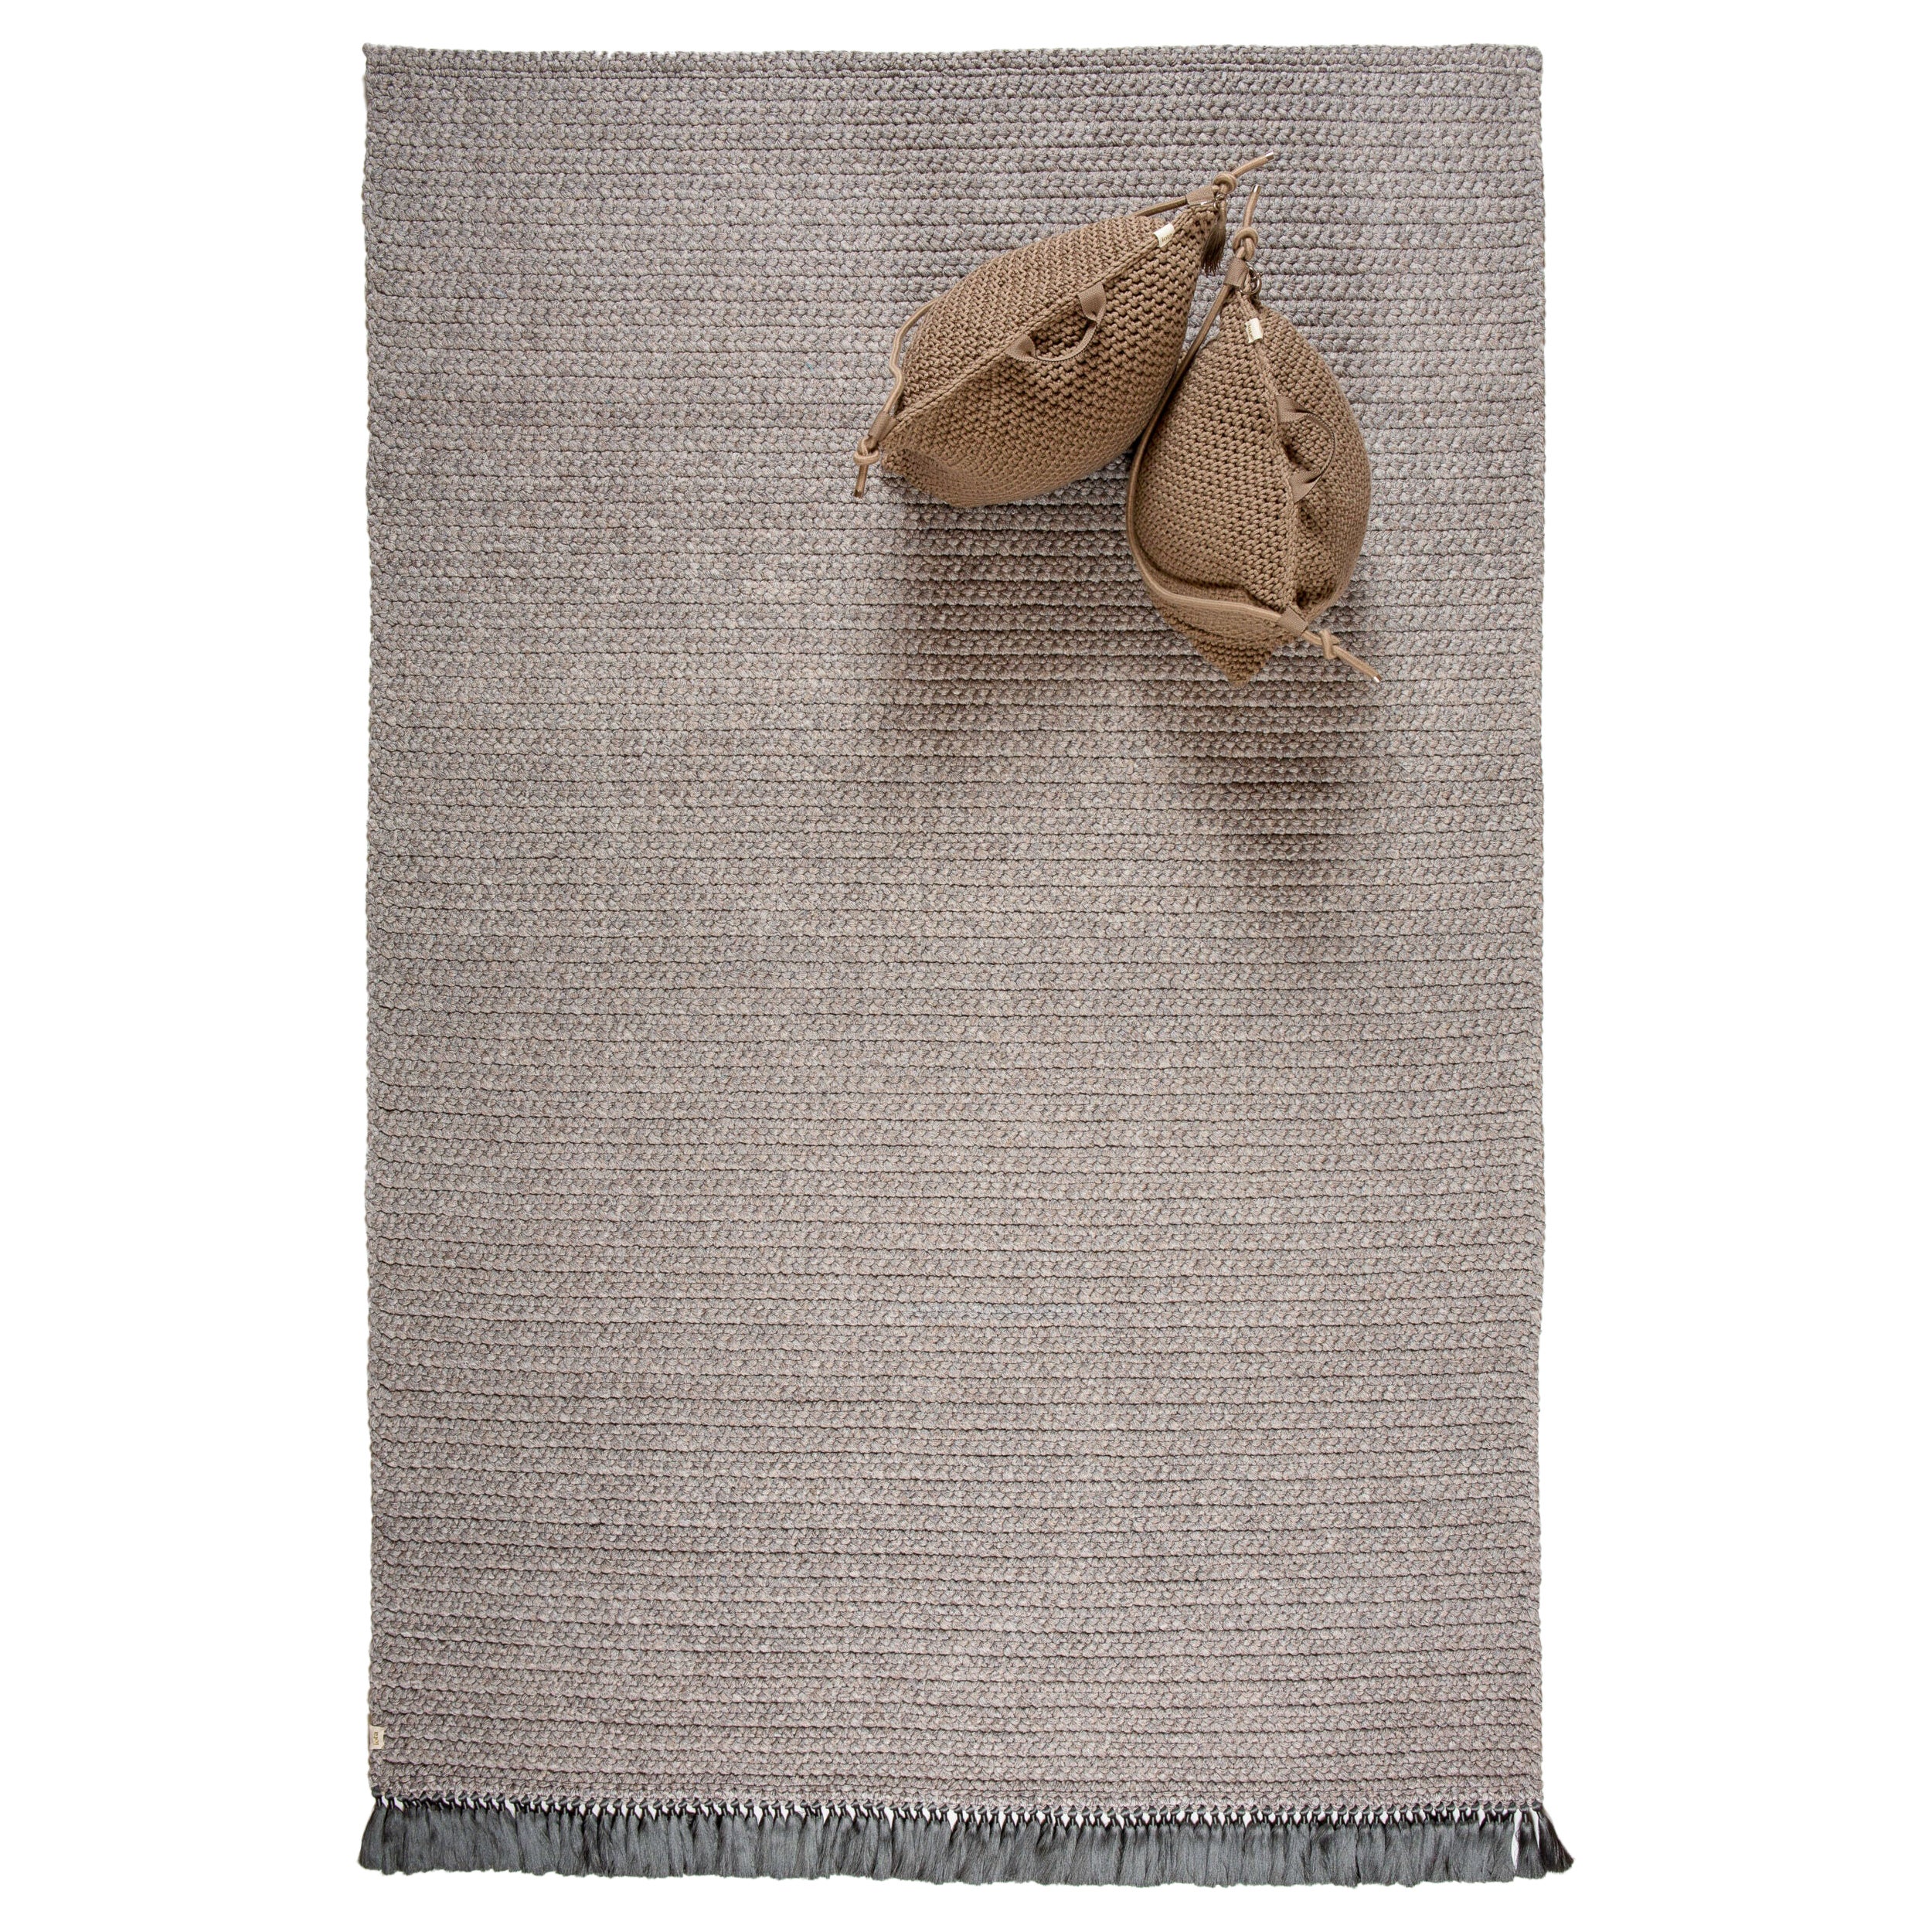 Handmade Crochet XL Thick Rug in Grey and Cacao made of Cotton & Polyester